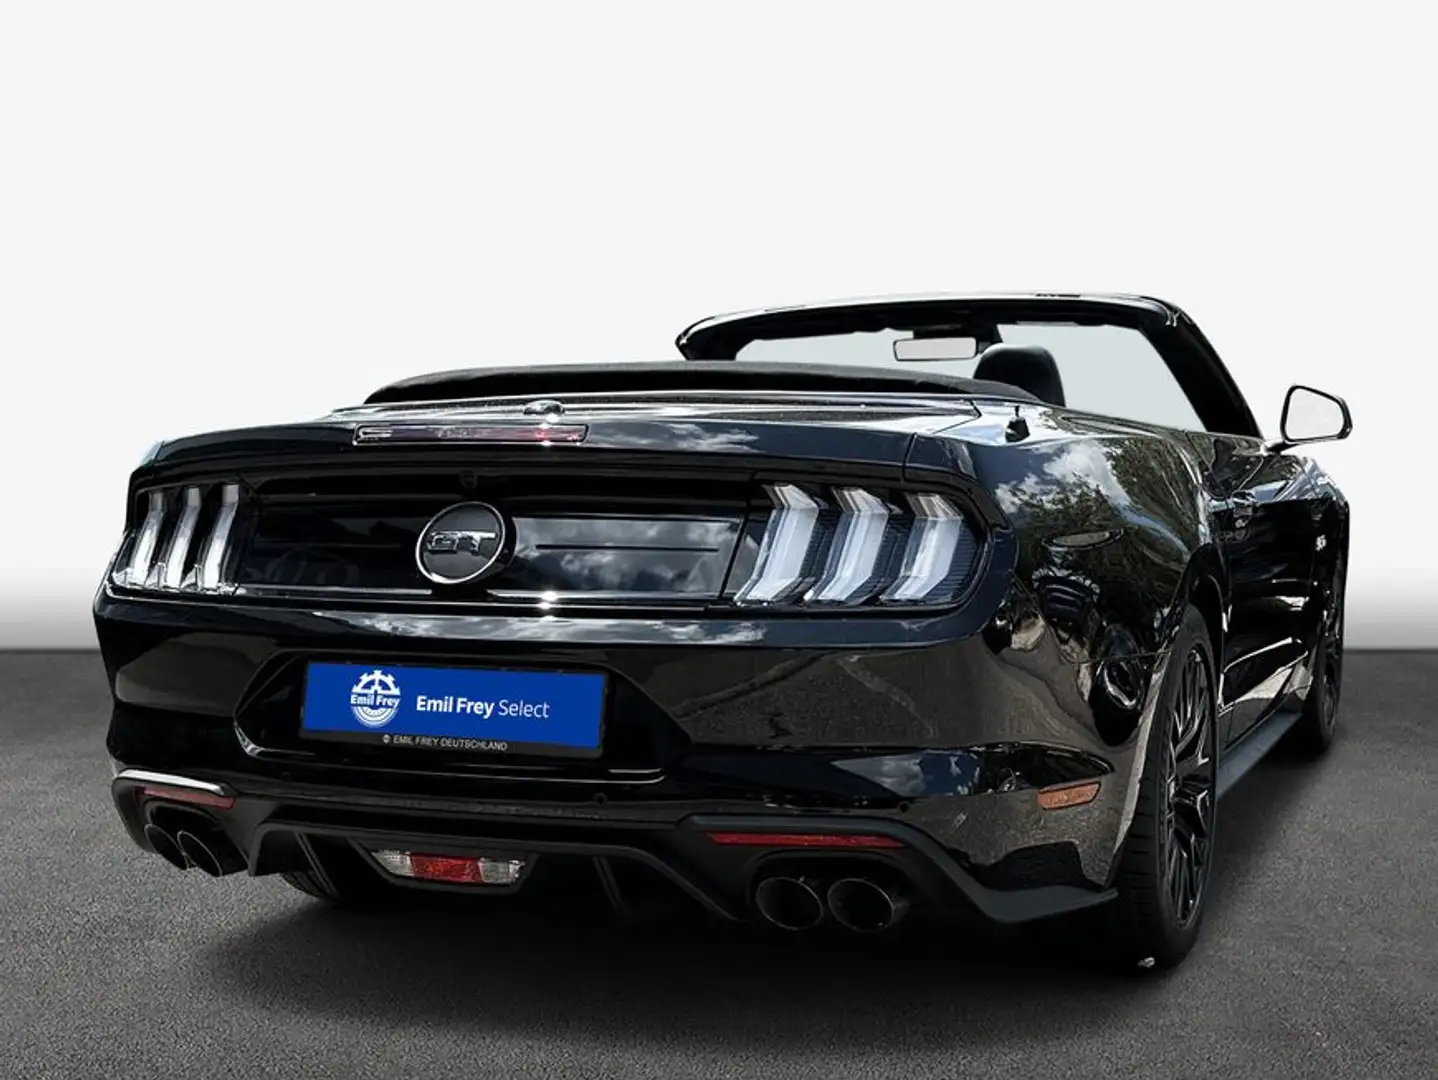 Ford Mustang Convertible 5.0 Ti-VCT V8 Aut. GT 330 kW, Noir - 2